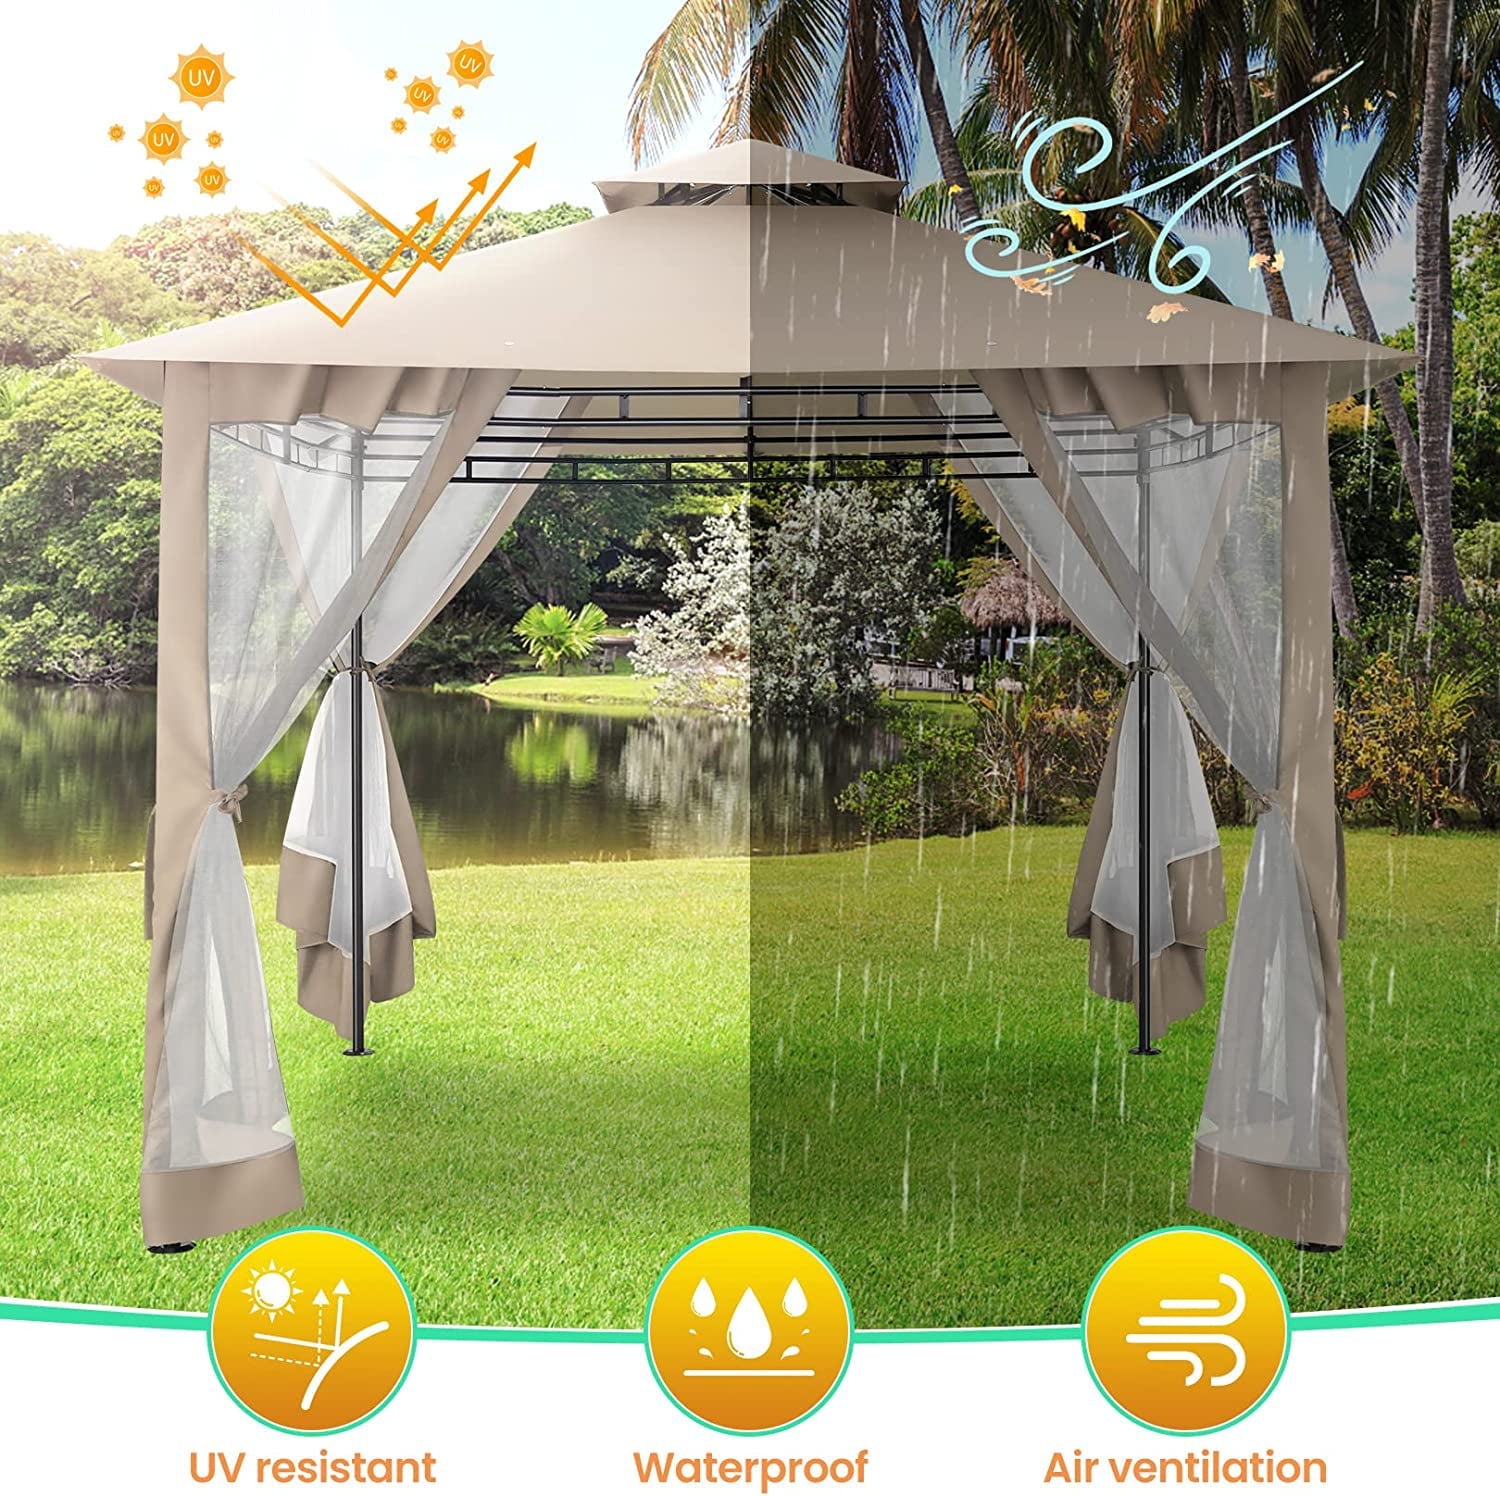 10 ' x 10 ' Gazebos for Patios, Gazebo Canopy with 4 Mosquito Netting, Rainproof & Sunscreen Shelter Tent with Double Eaves for Garden Backyard and Deck